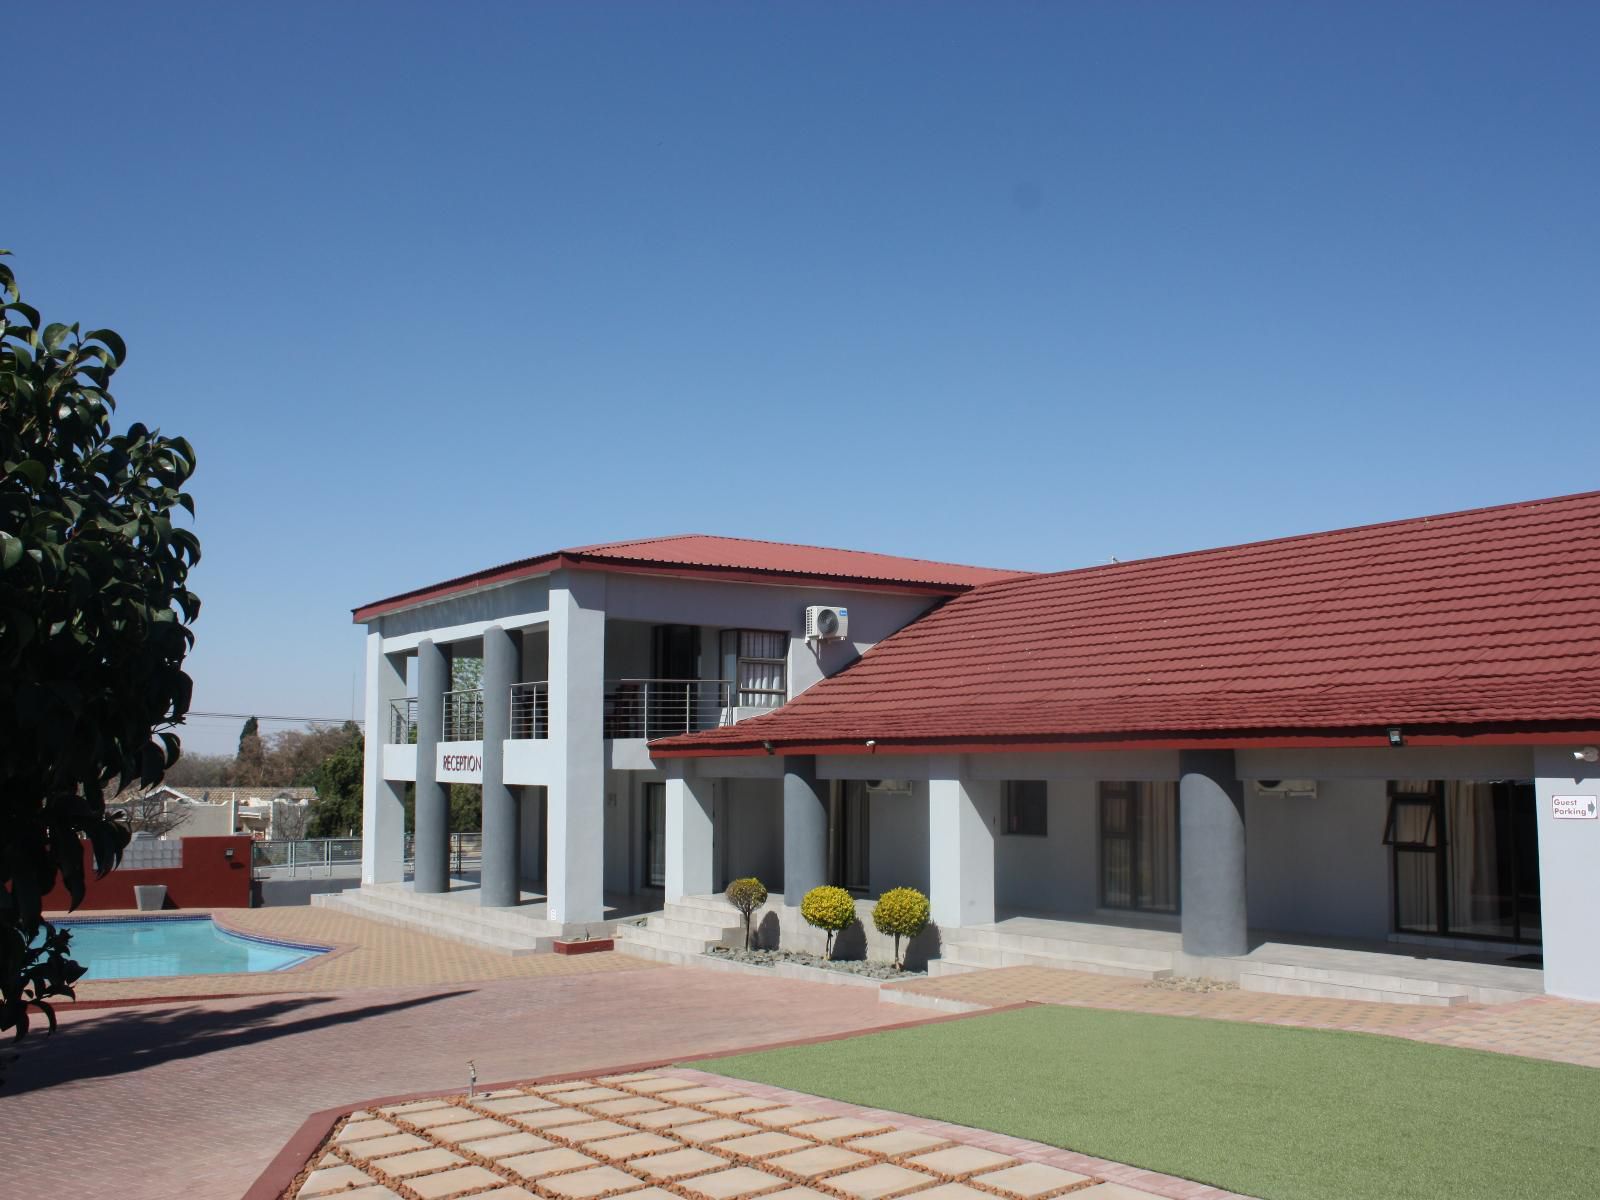 On Hill Lodge Bayswater Bloemfontein Free State South Africa Complementary Colors, House, Building, Architecture, Swimming Pool